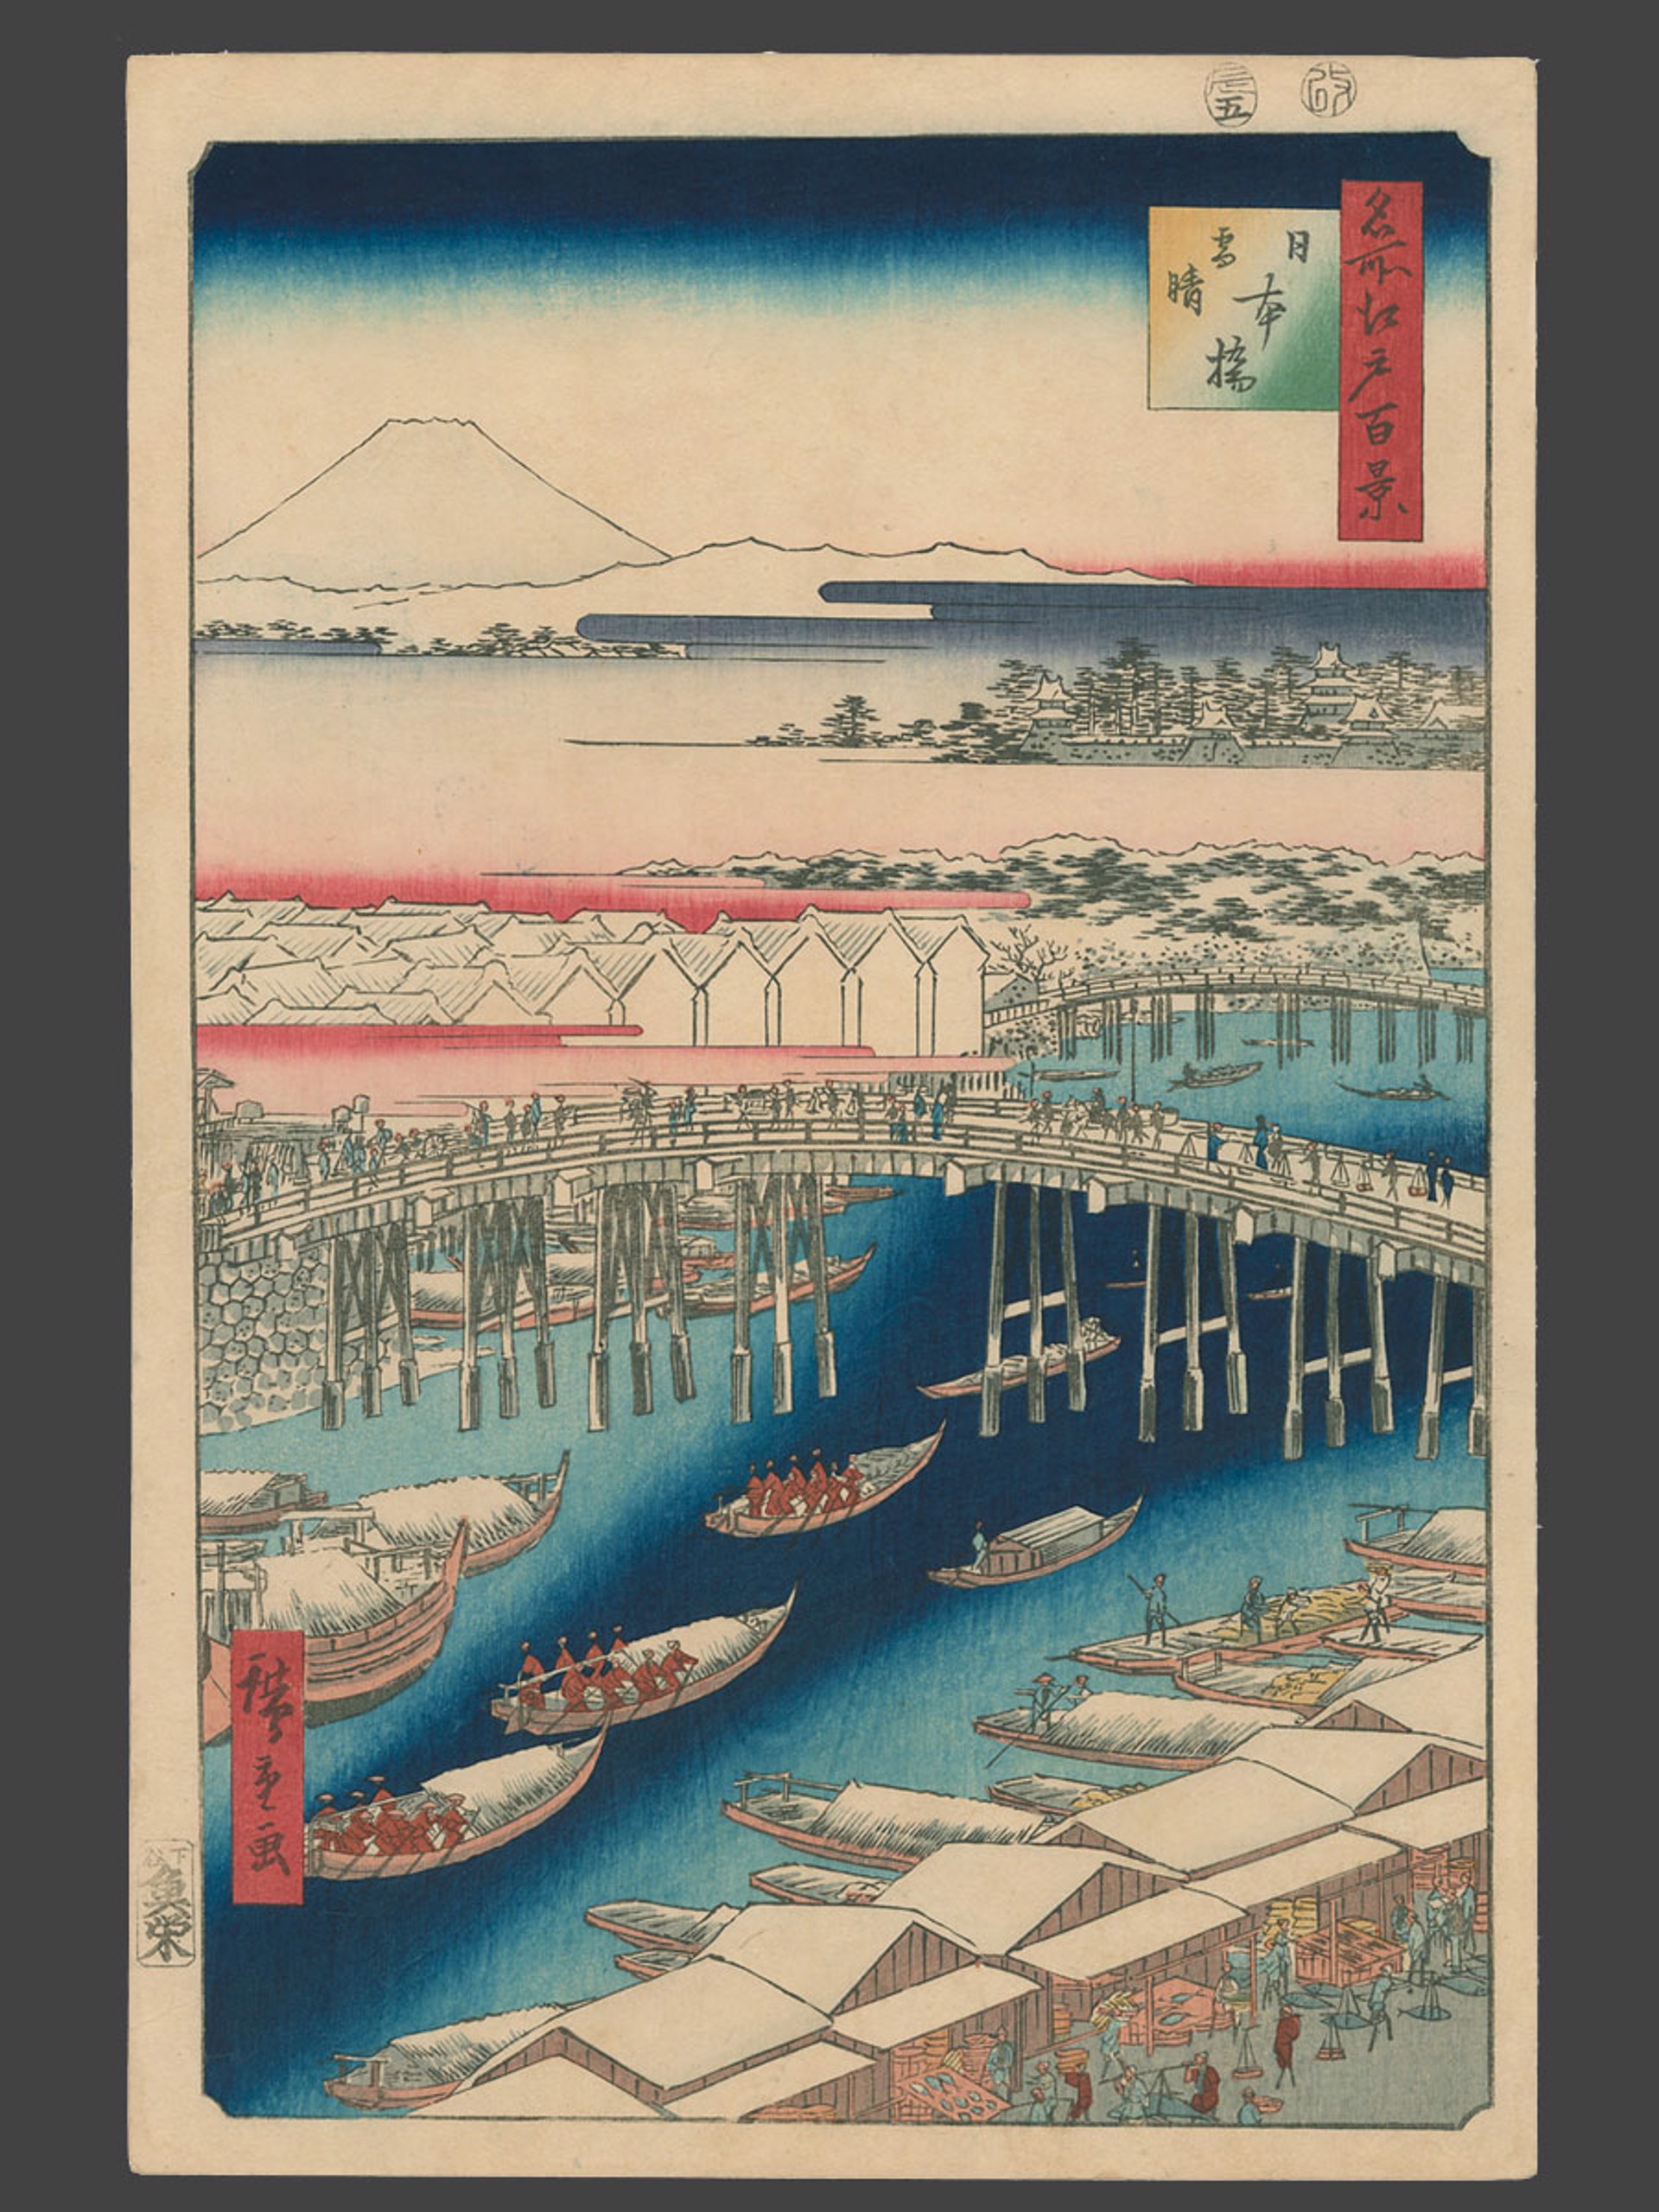 #1 Nihonbashi, Clearing After Snow 100 Views of Edo by Hiroshige